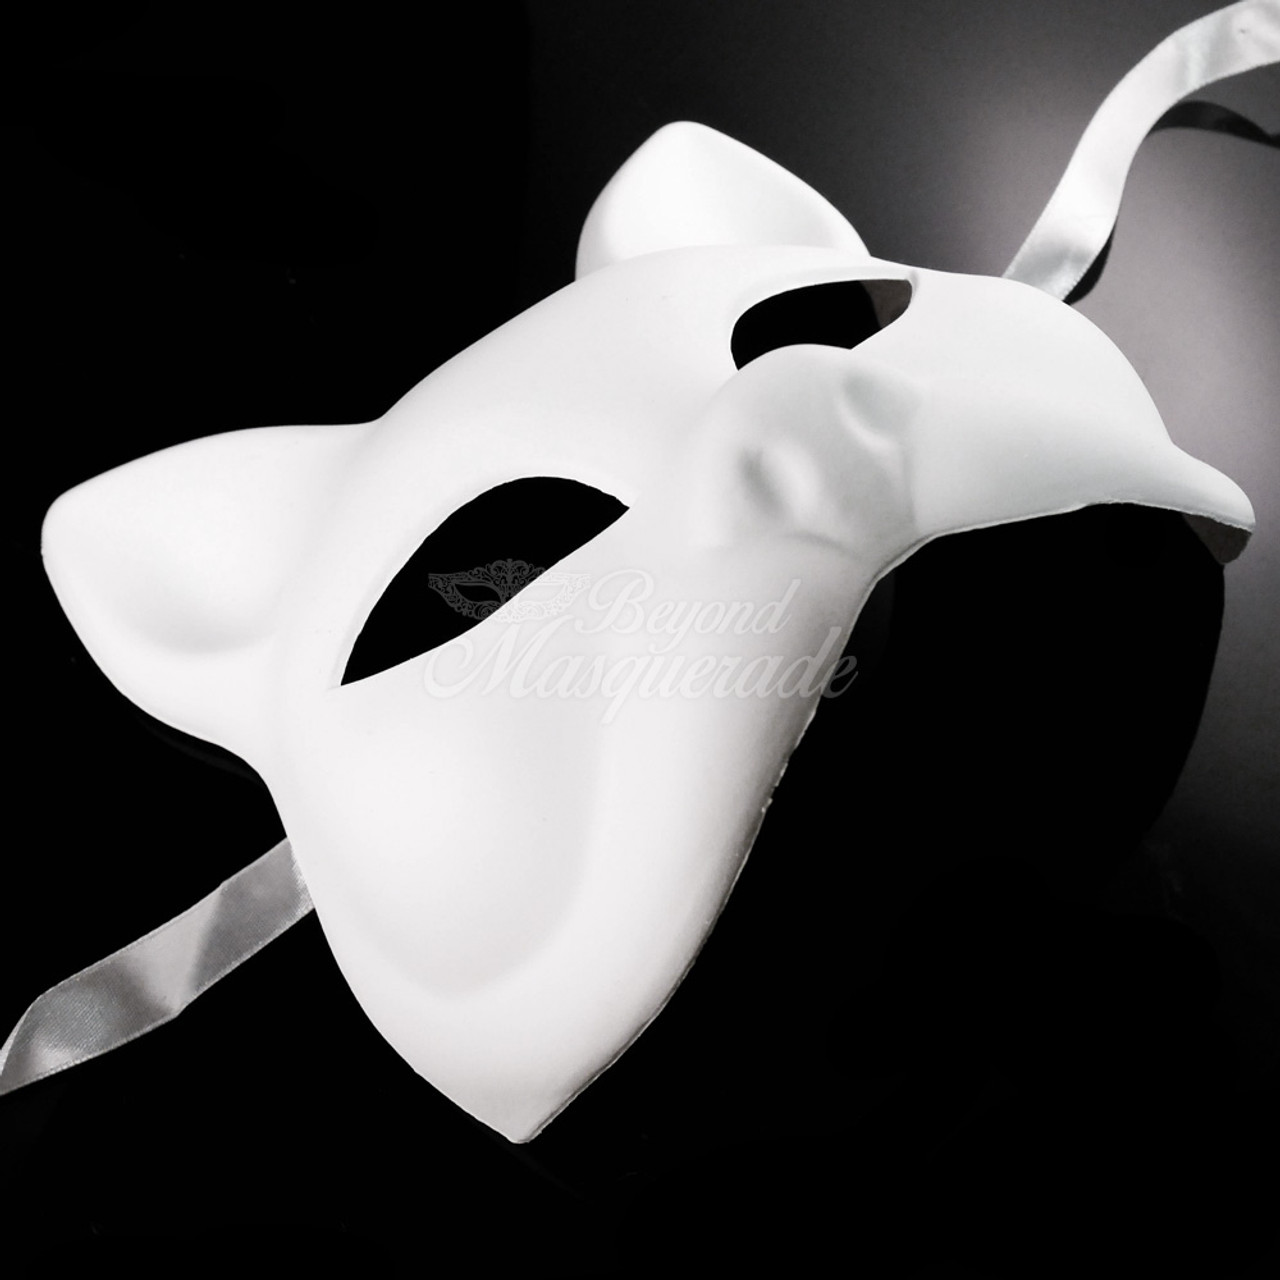 Men's Masquerade Ball Masks Halloween Costume Up to 60% OFF